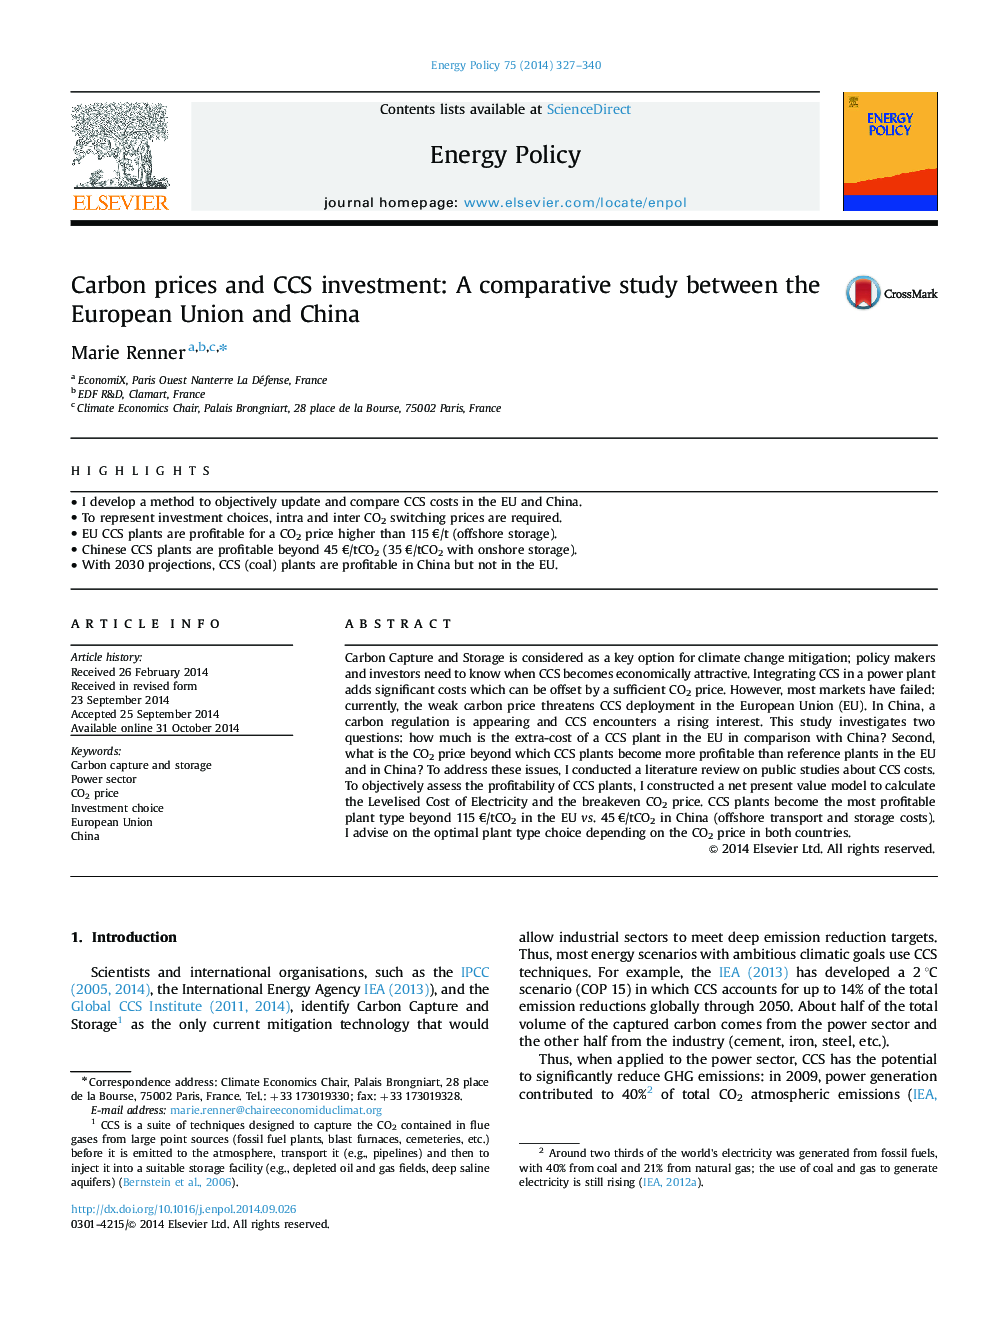 Carbon prices and CCS investment: A comparative study between the European Union and China